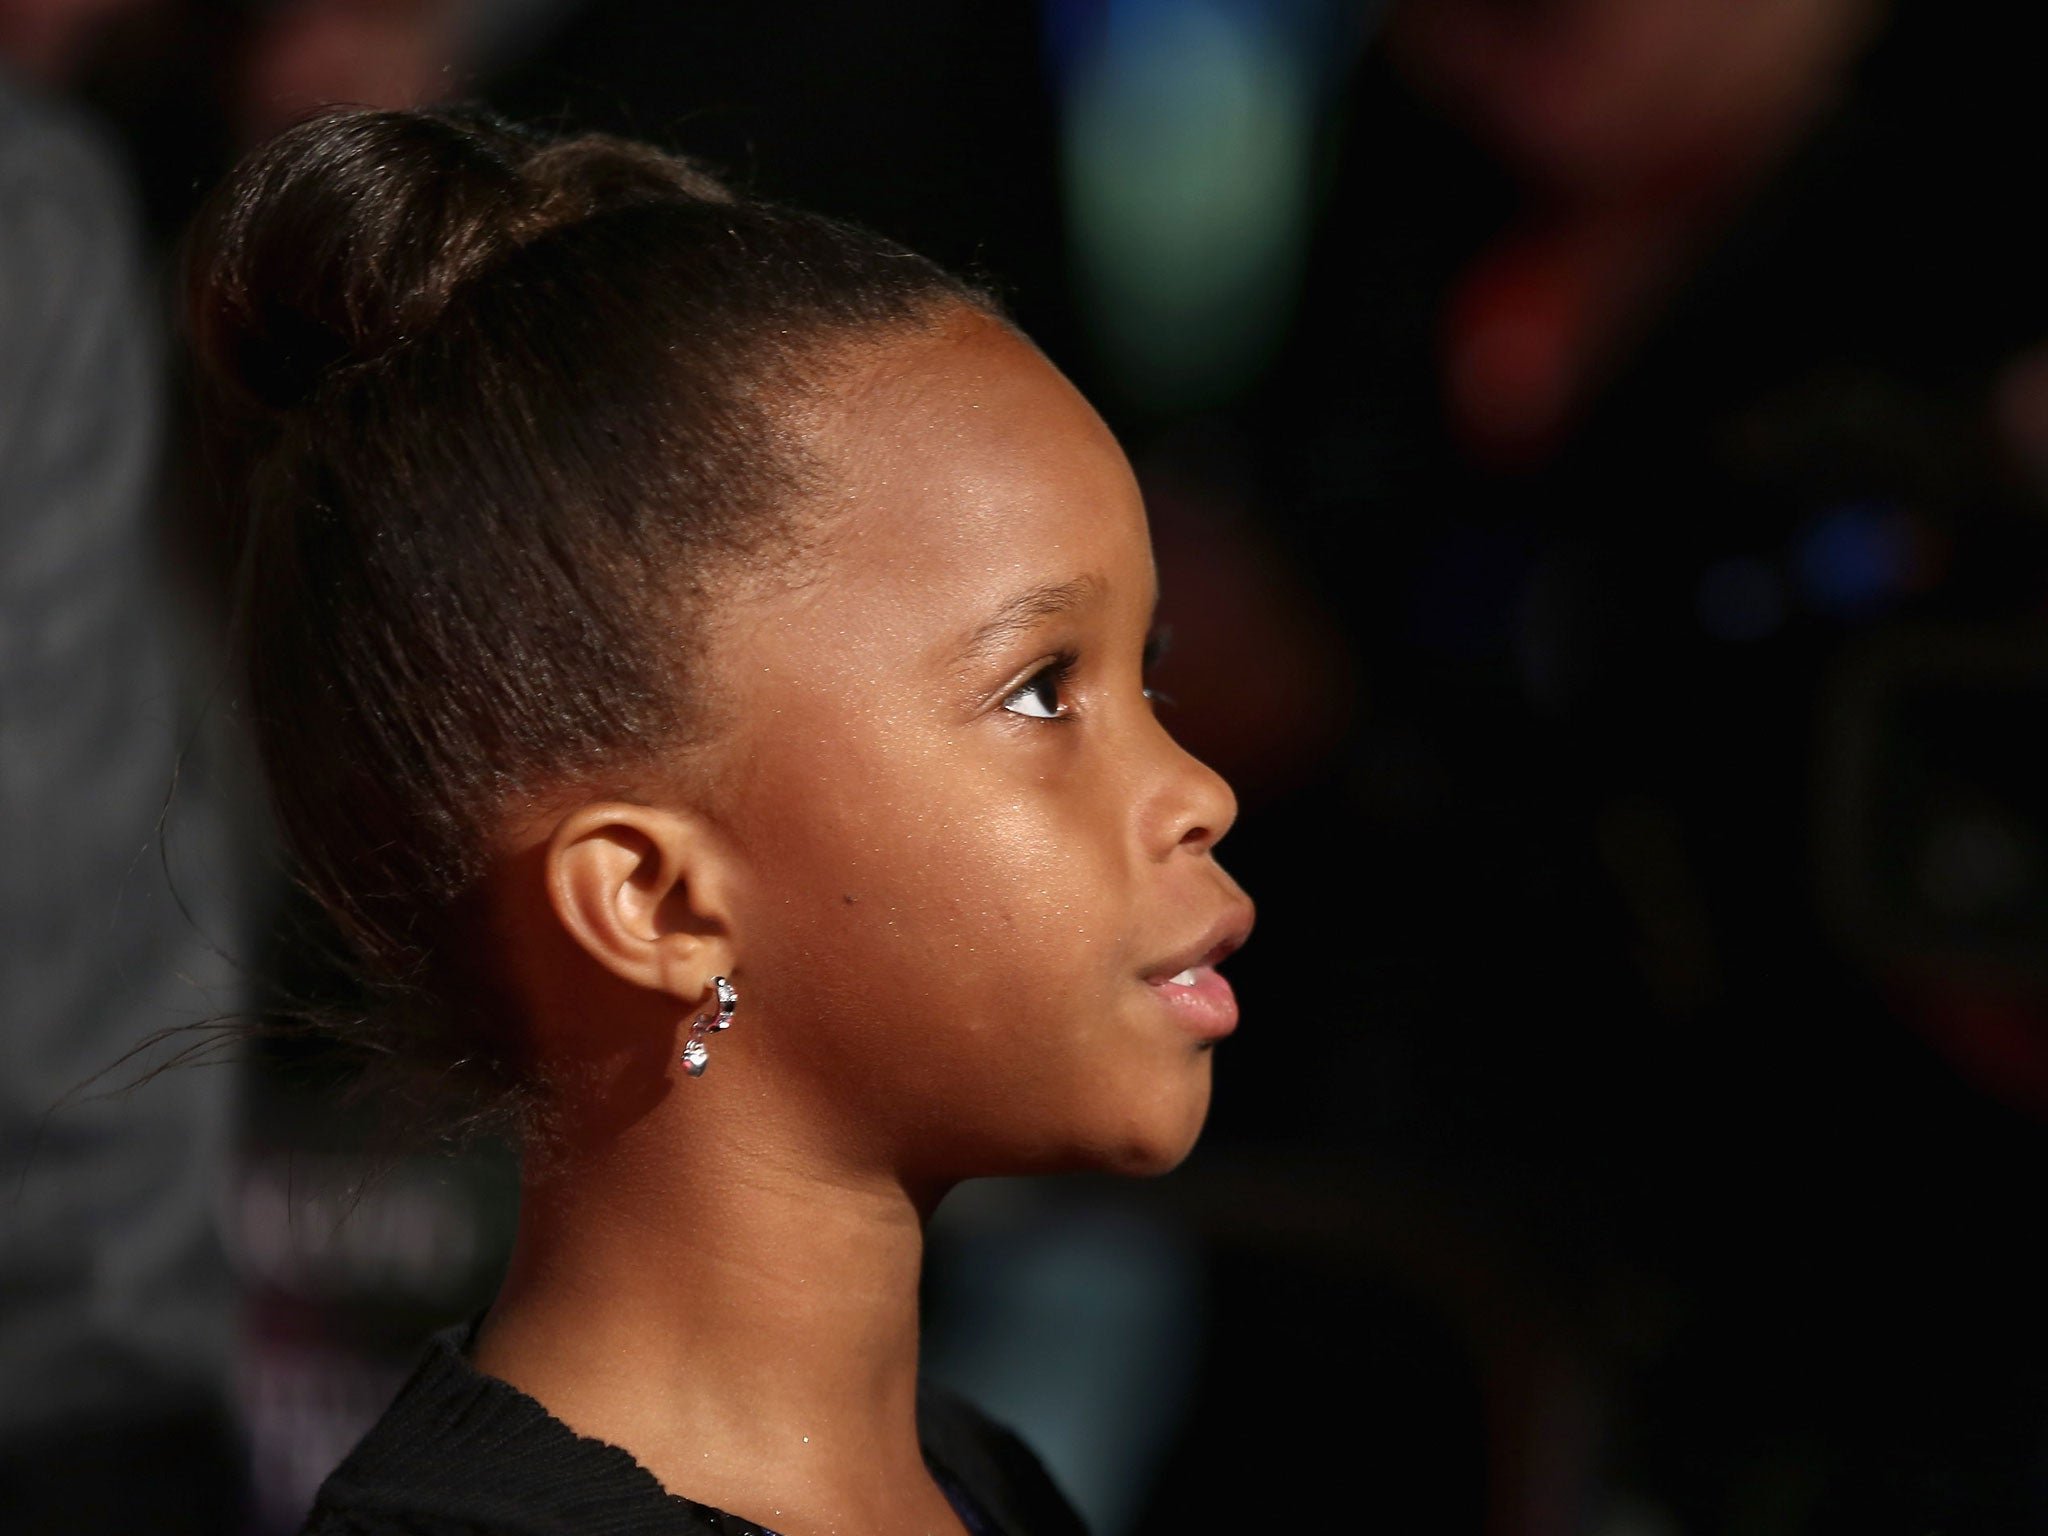 Actress Quvenzhane Wallis attends the 'Beasts of the Southern Wild' premiere during the 56th BFI London Film Festival at the Odeon West End on October 12, 2012 in London, England.